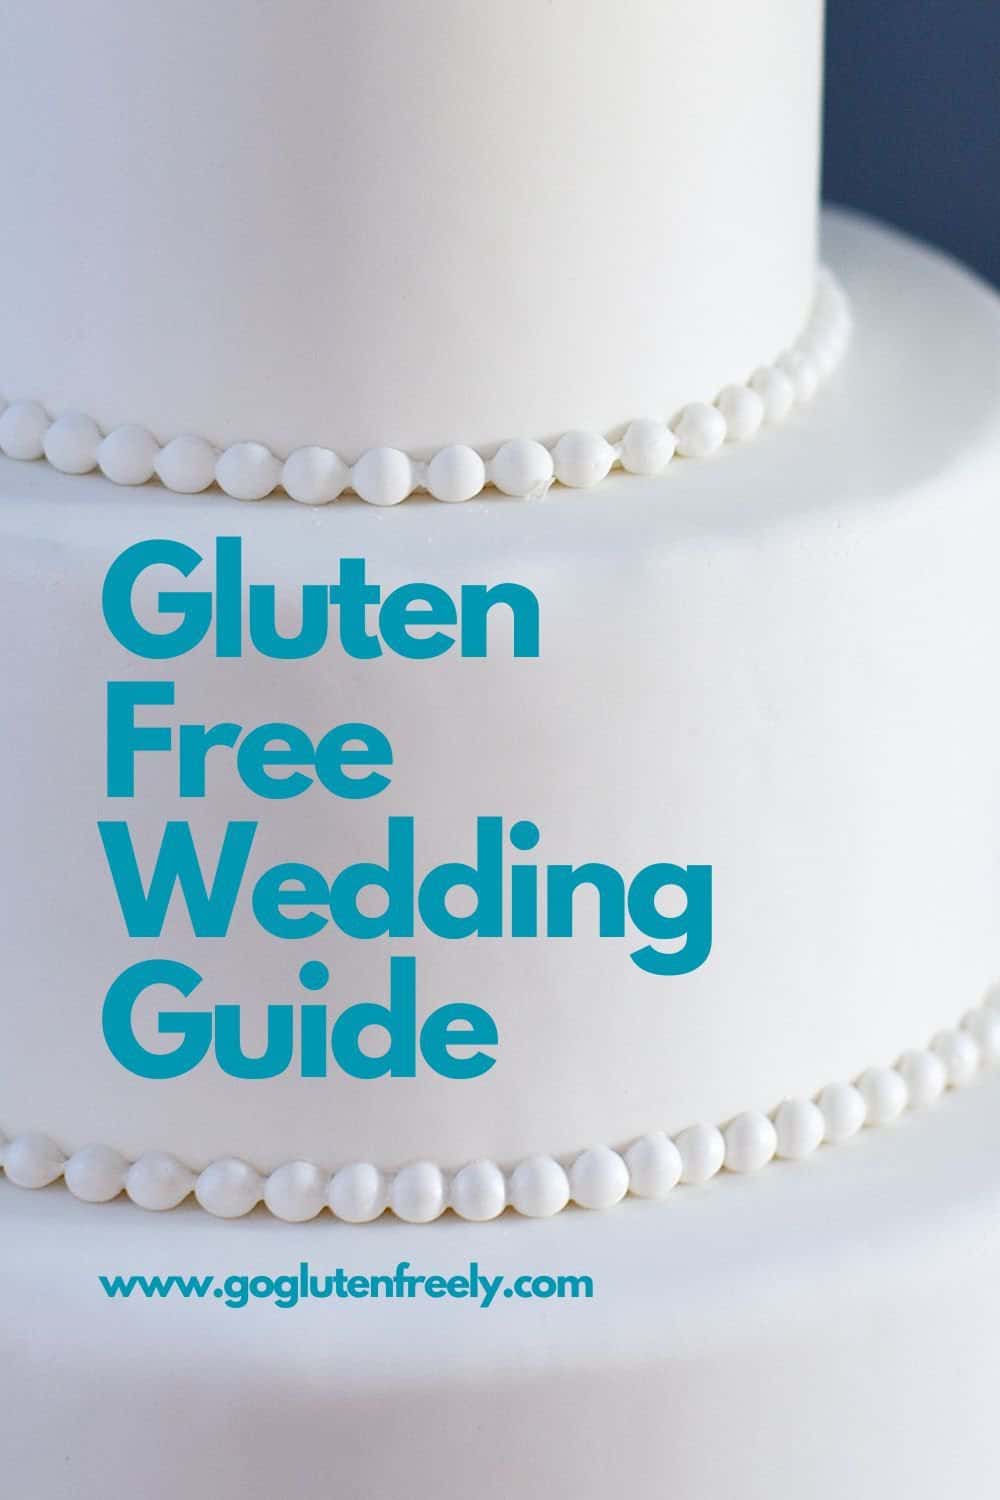 part of a three tiered white wedding cake in the background, teal text: Gluten Free Wedding Guide www.goglutenfreely.com